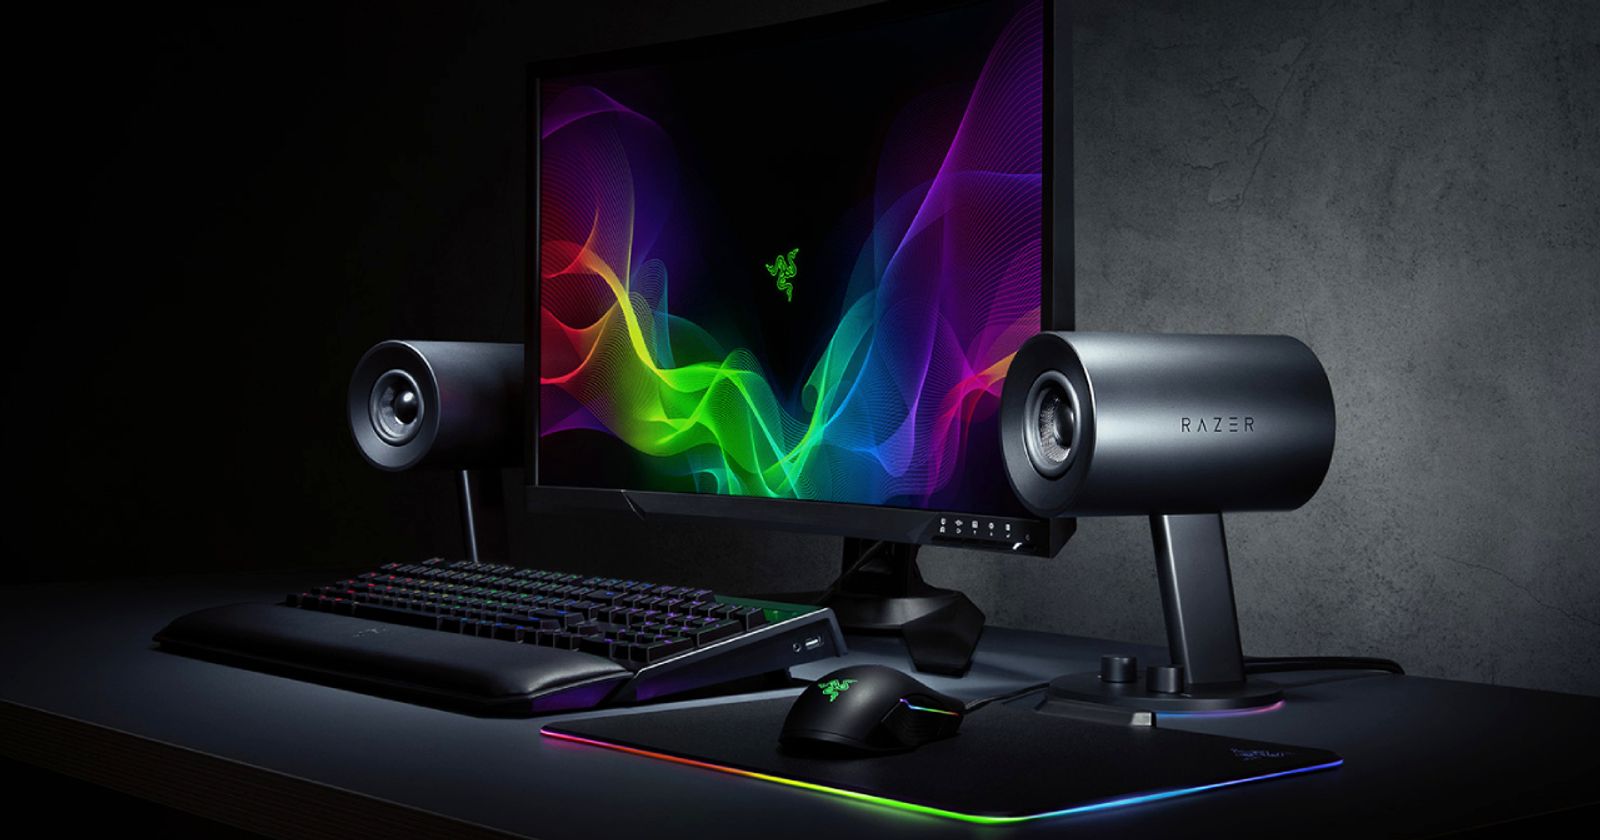 Do all monitors have speakers?